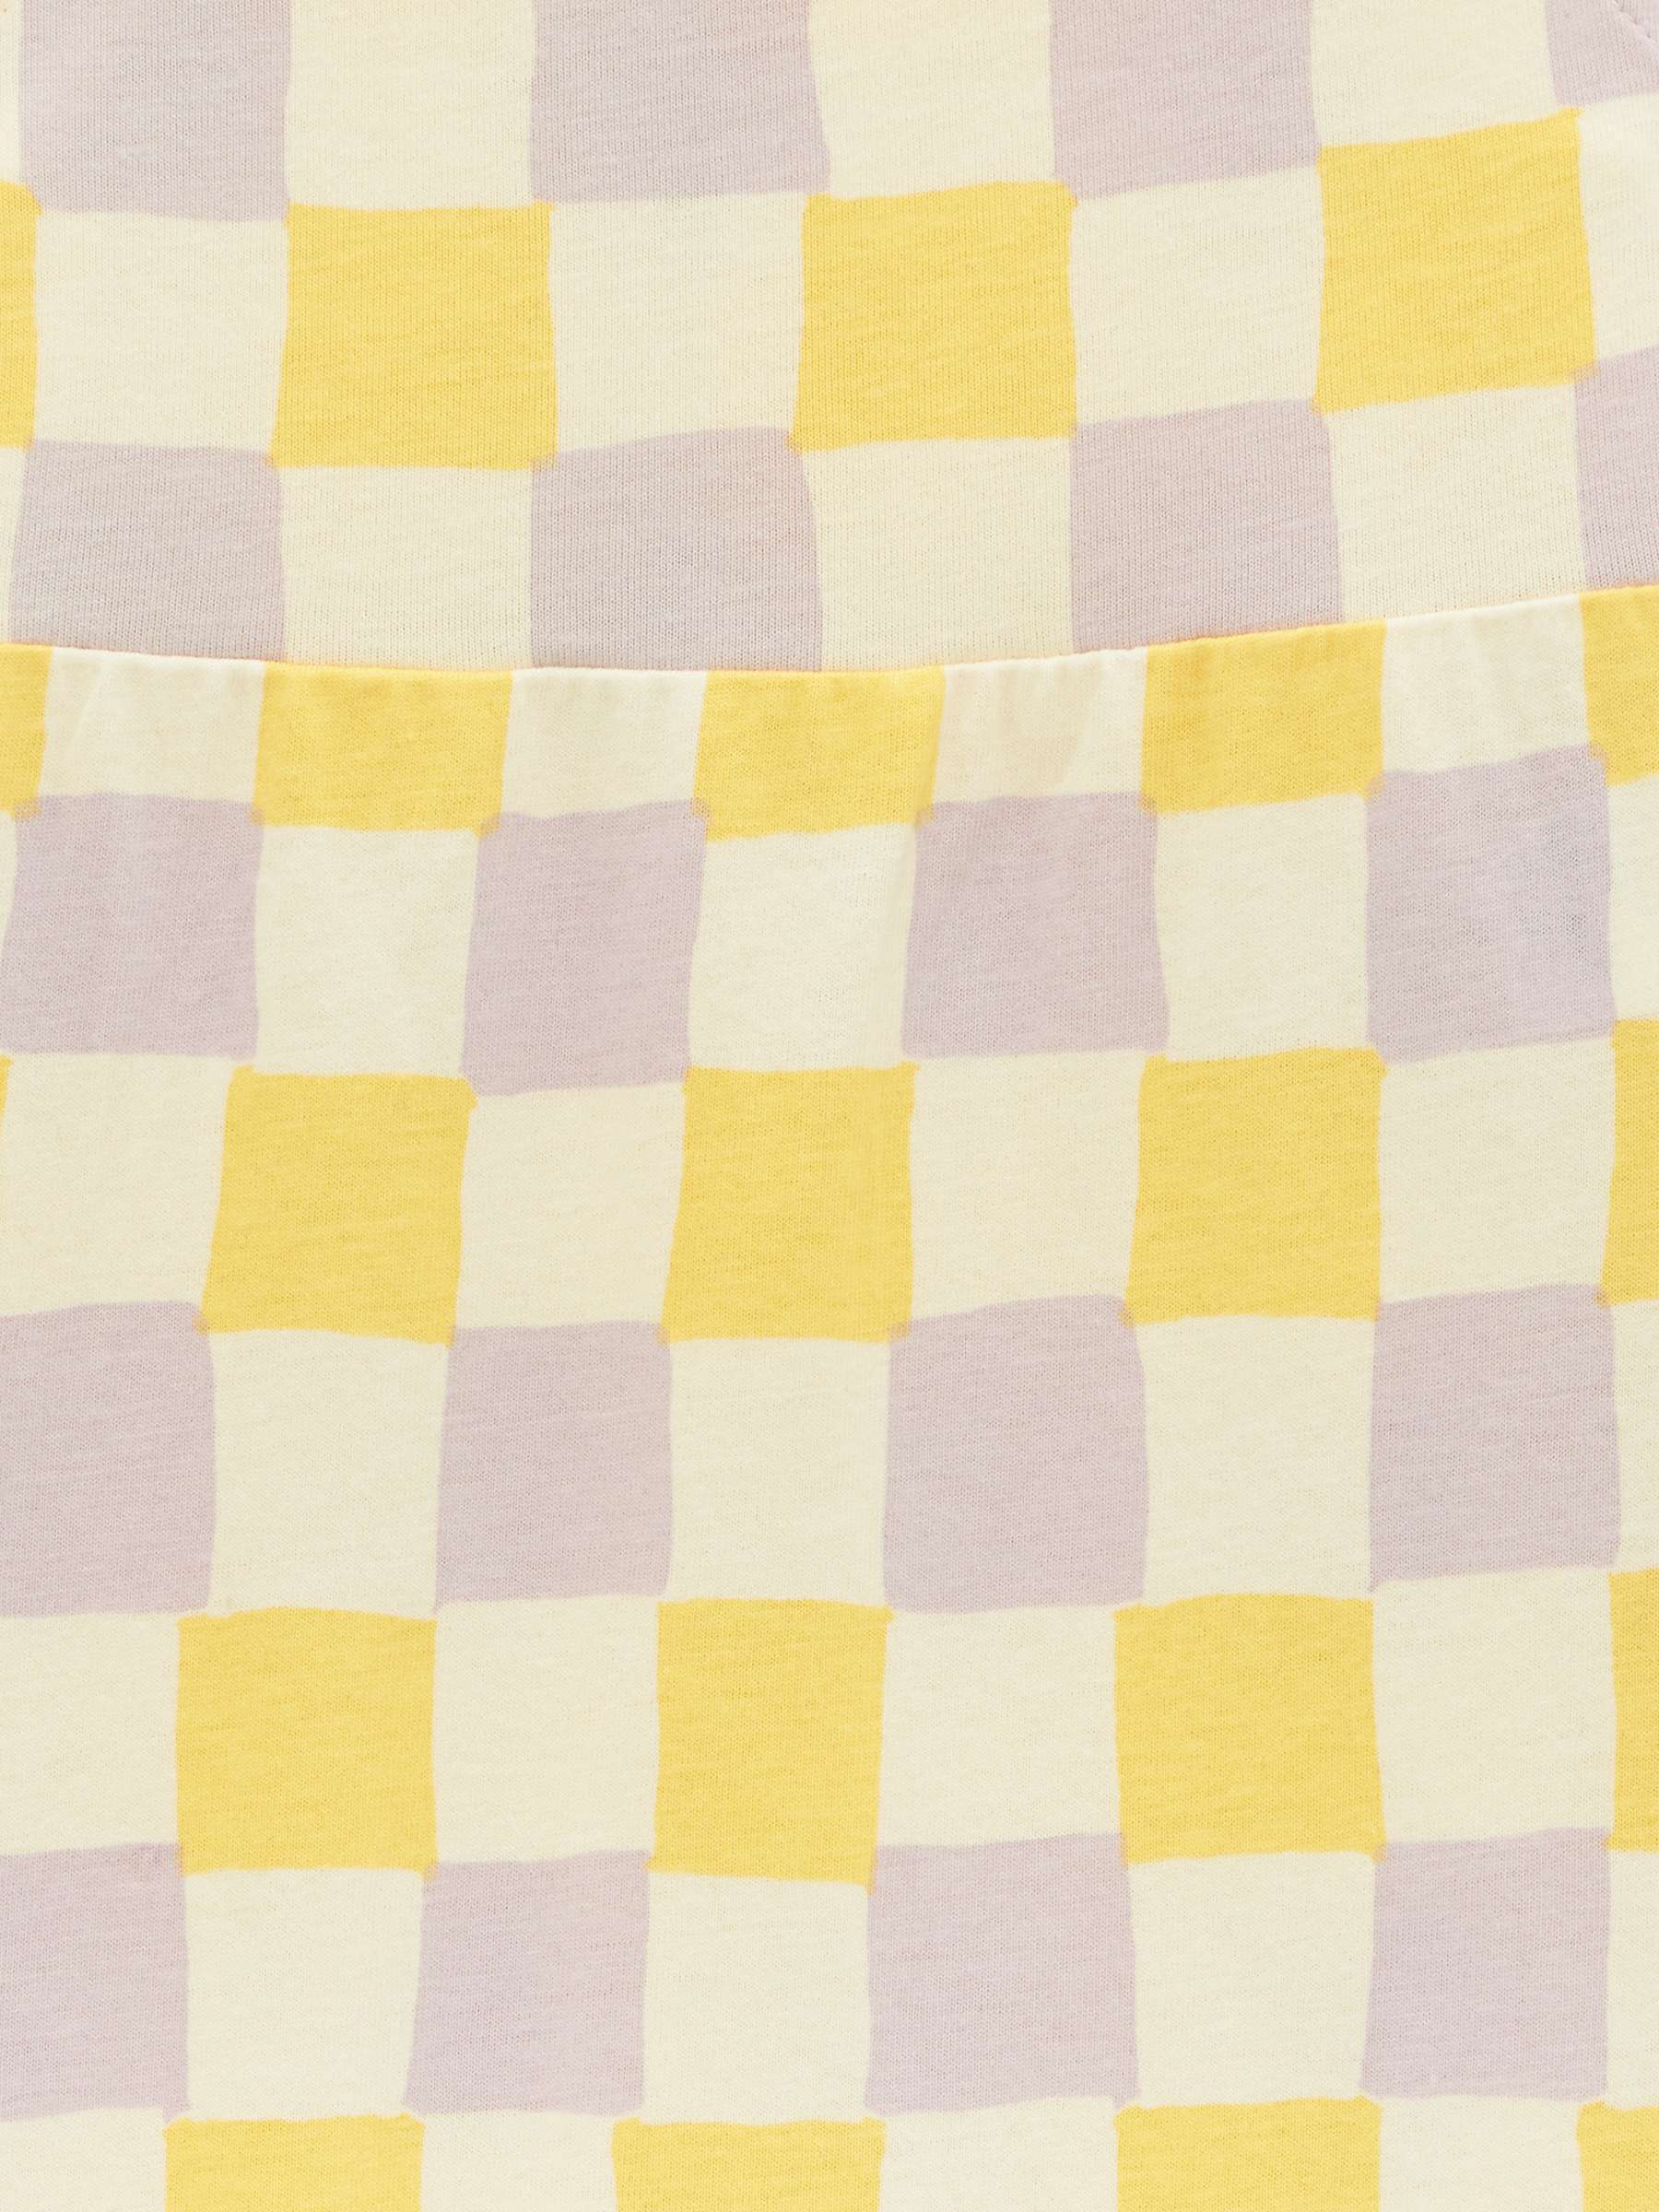 Buy John Lewis ANYDAY Baby Checker Romper, Yellow Online at johnlewis.com